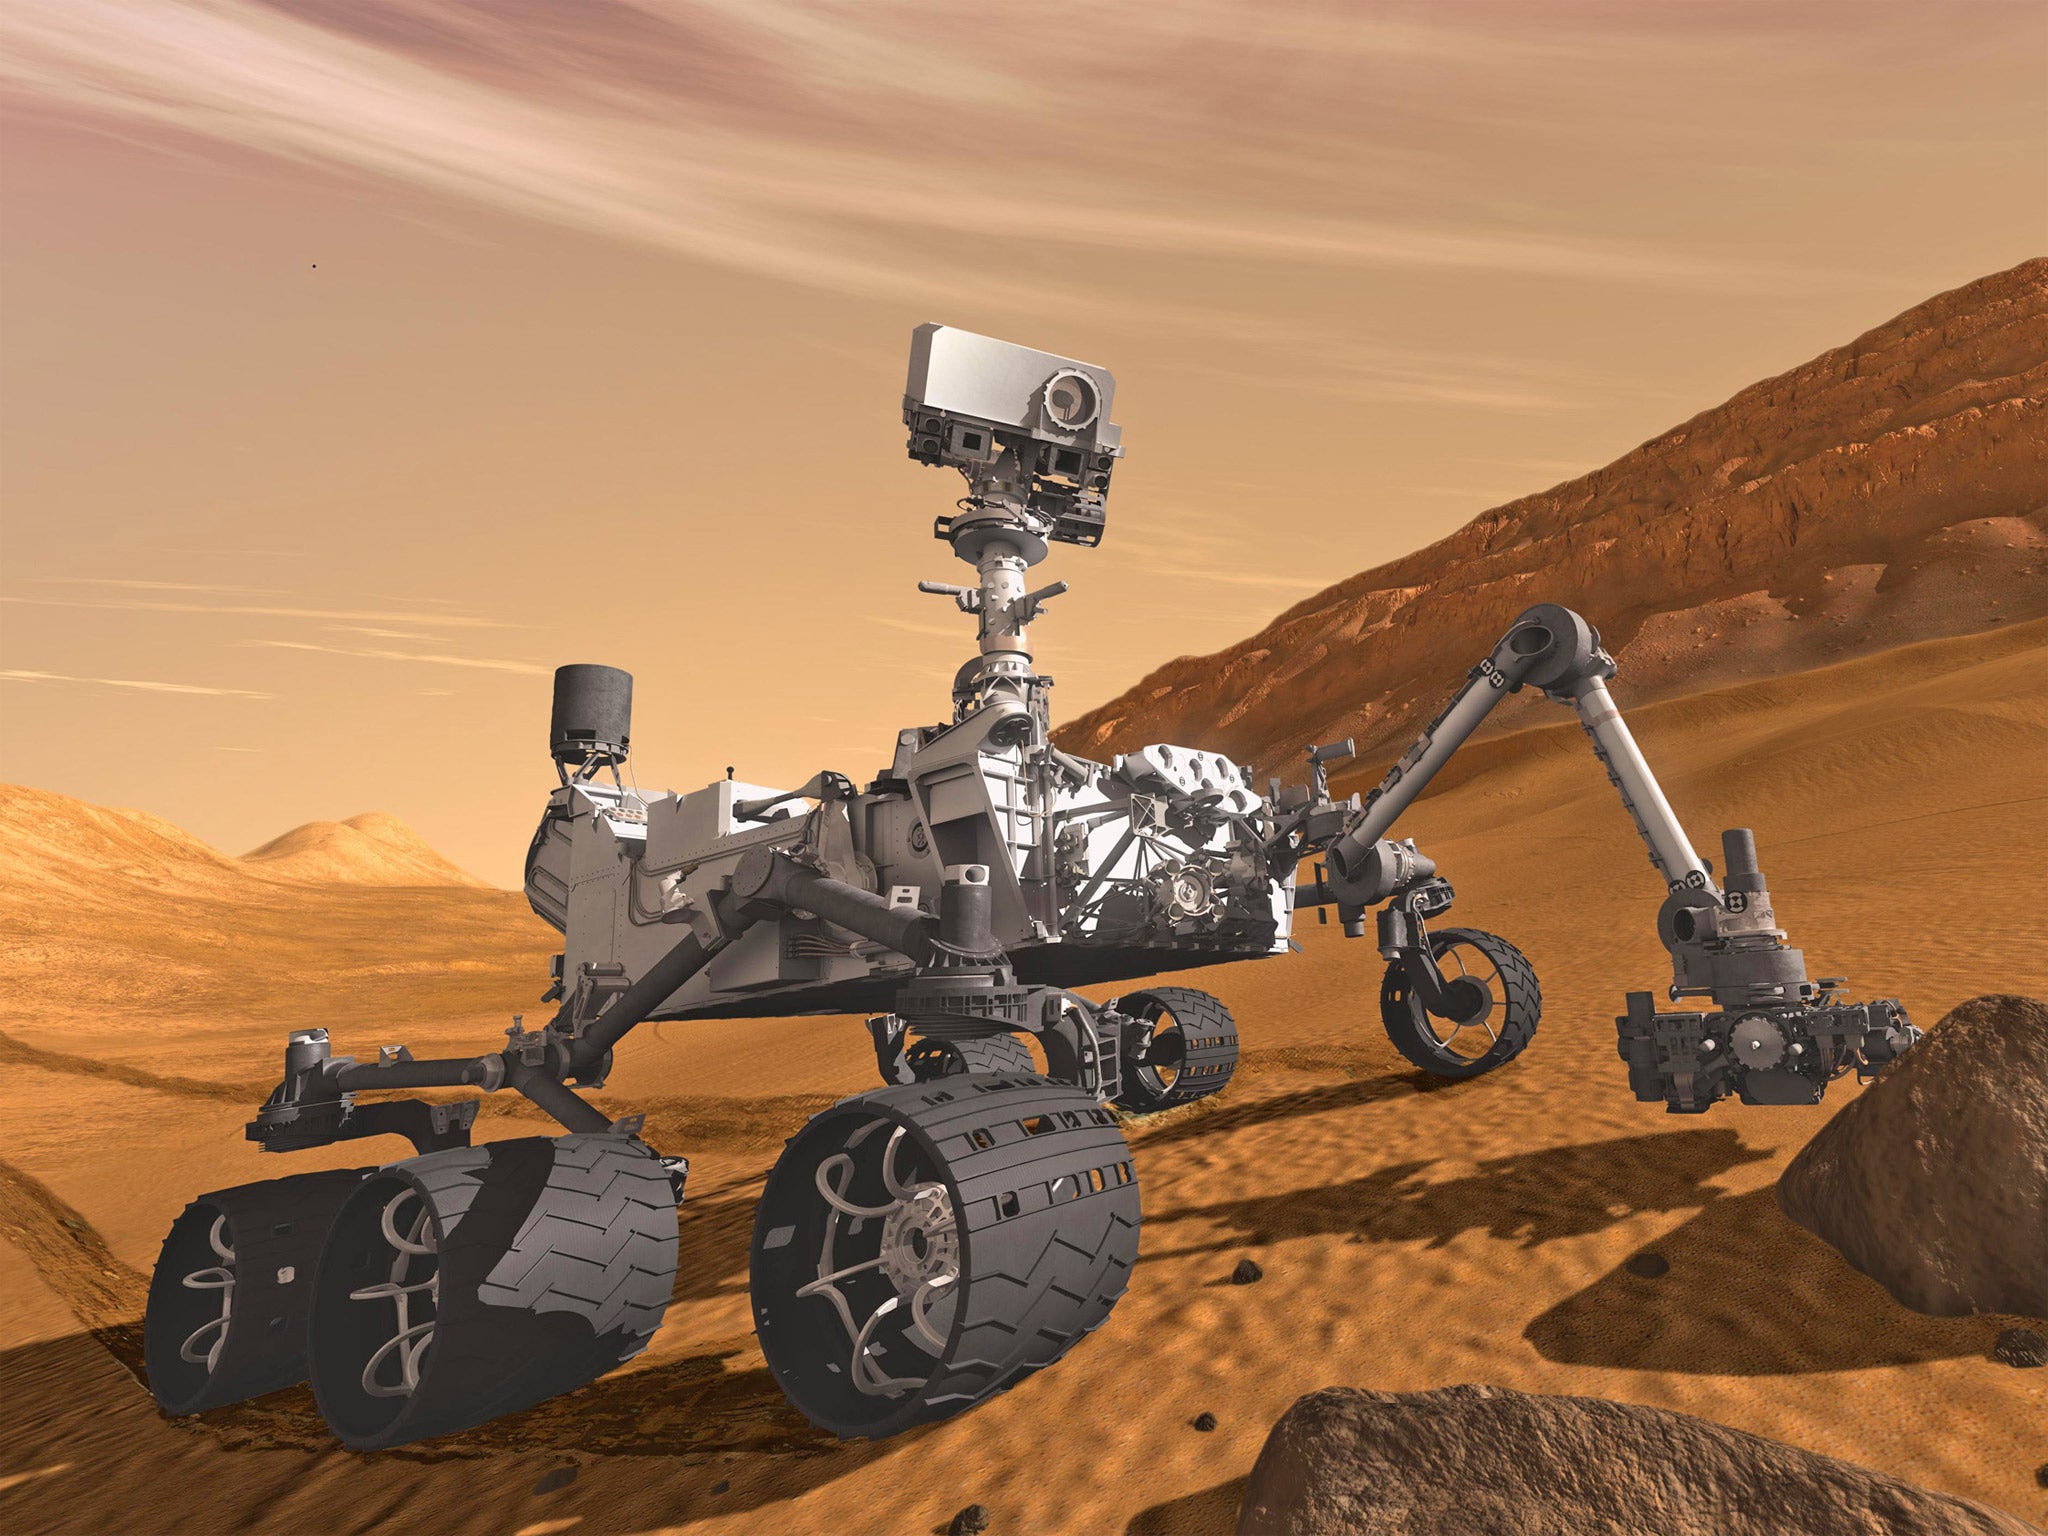 Curiosity survived its daredevil landing on Mars one year ago